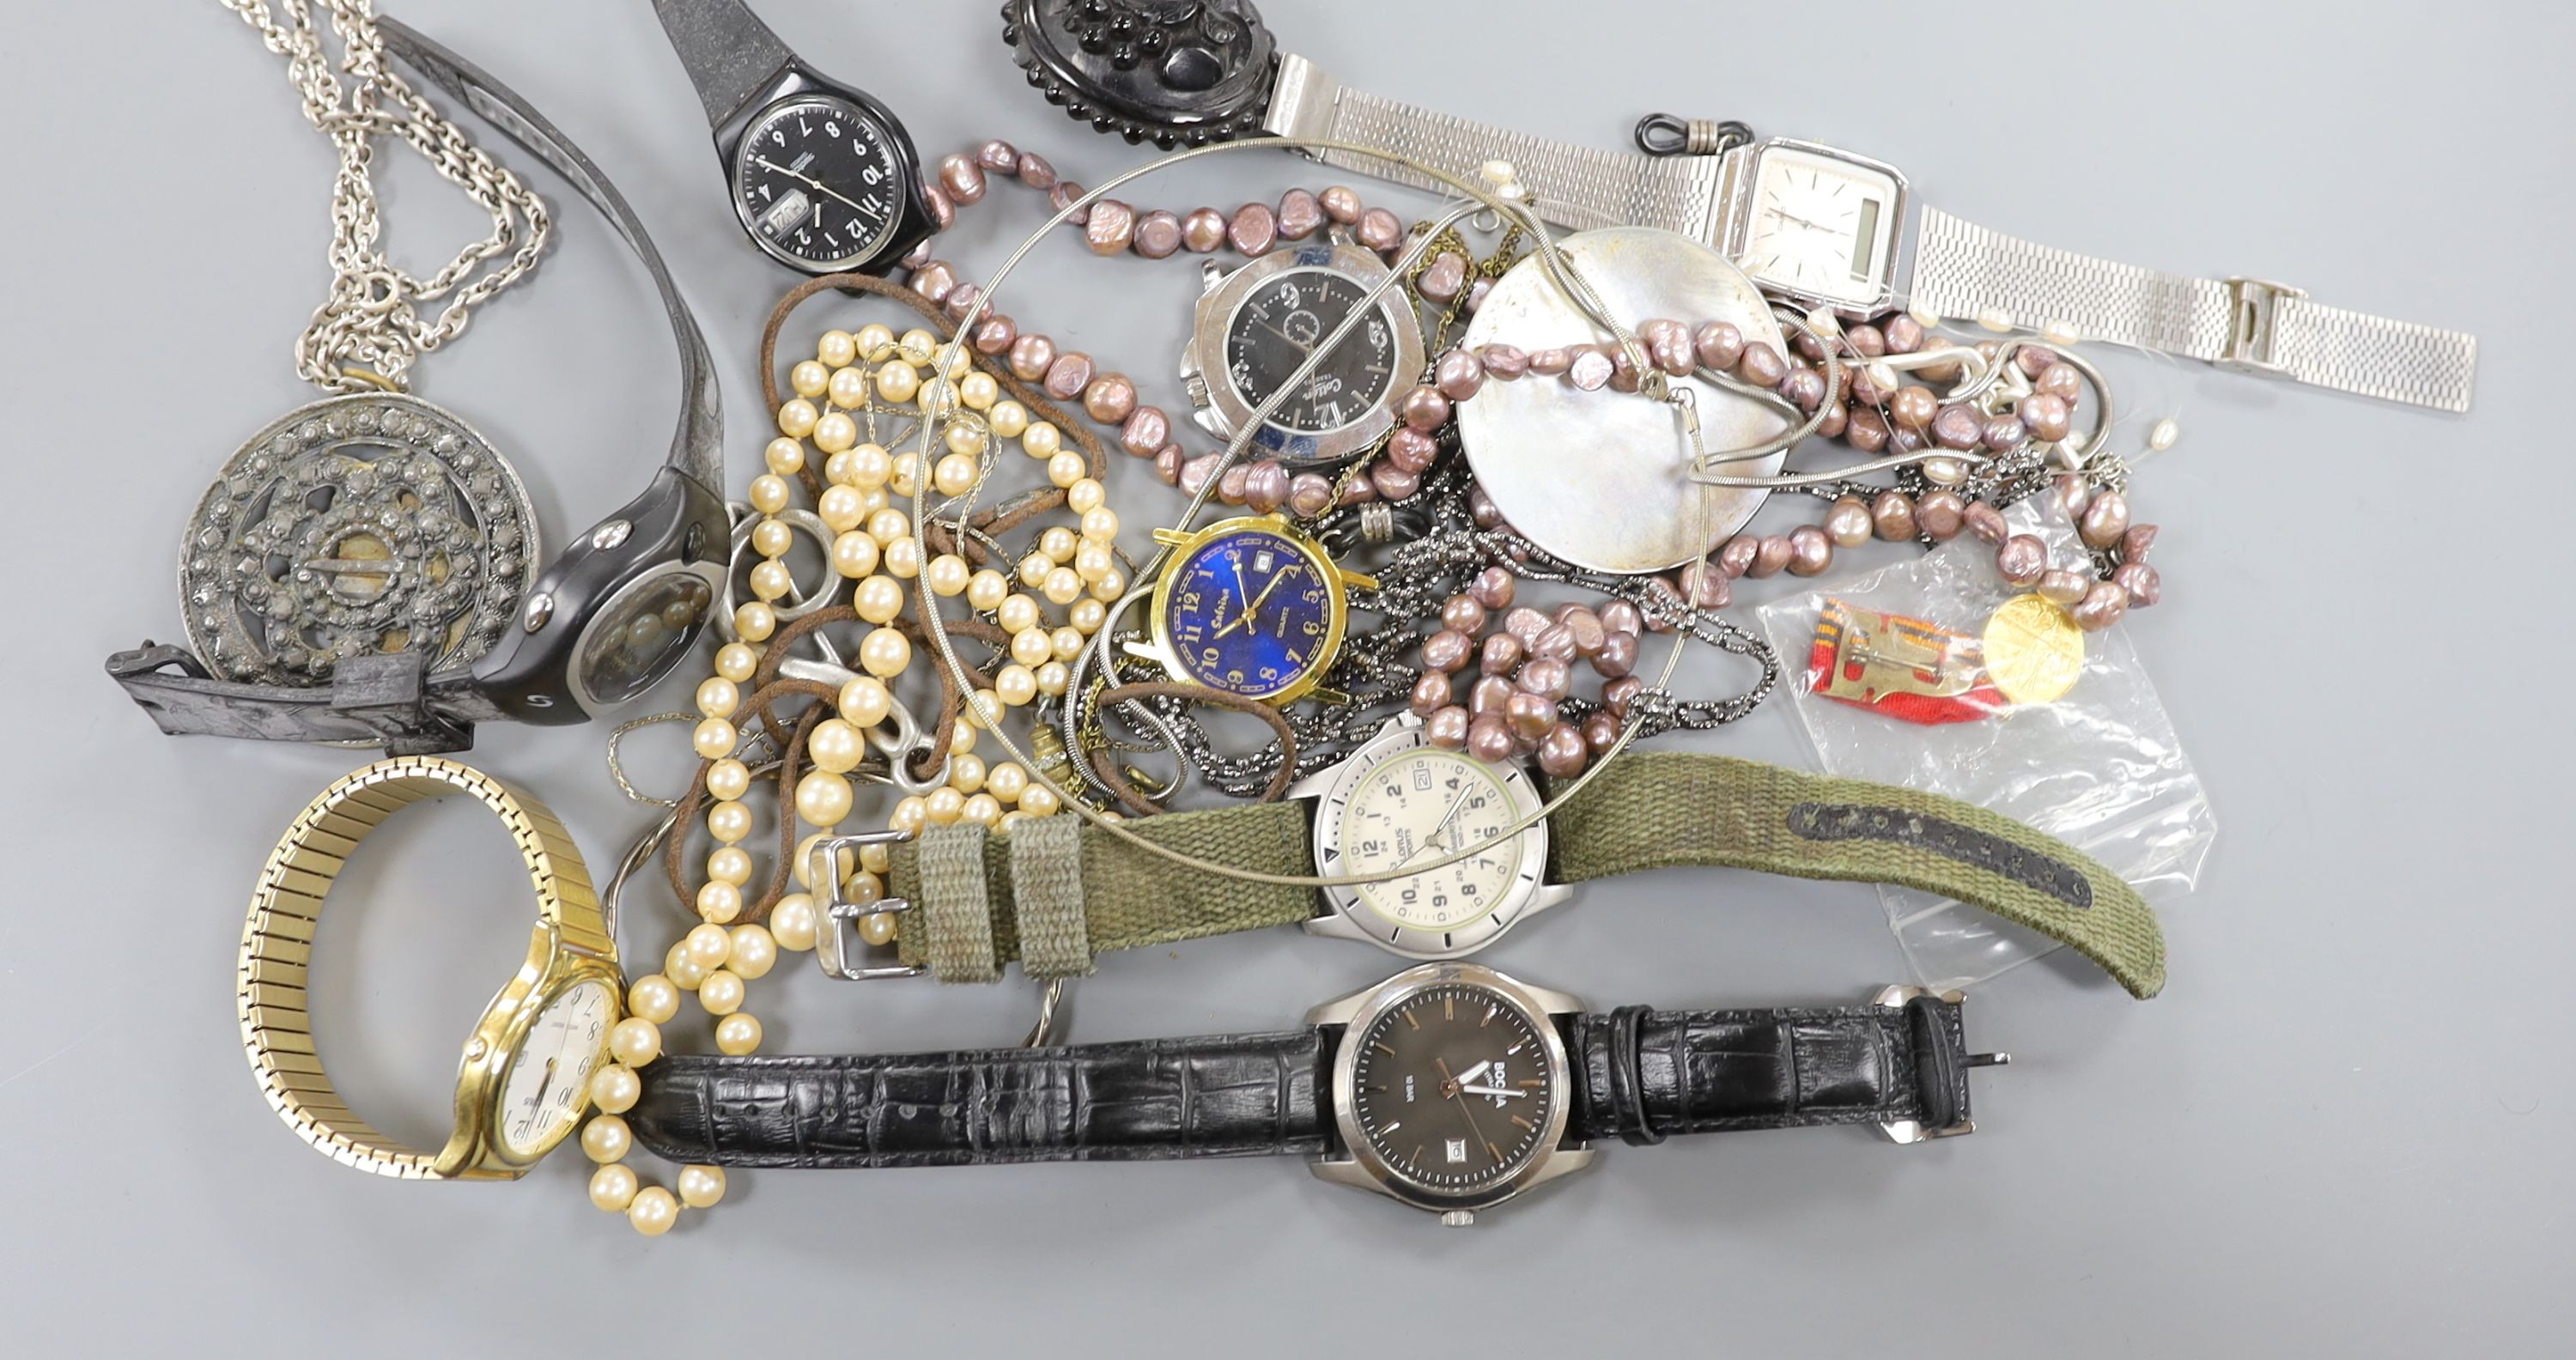 A small quantity of modern minor wrist watches and assorted costume jewellery.